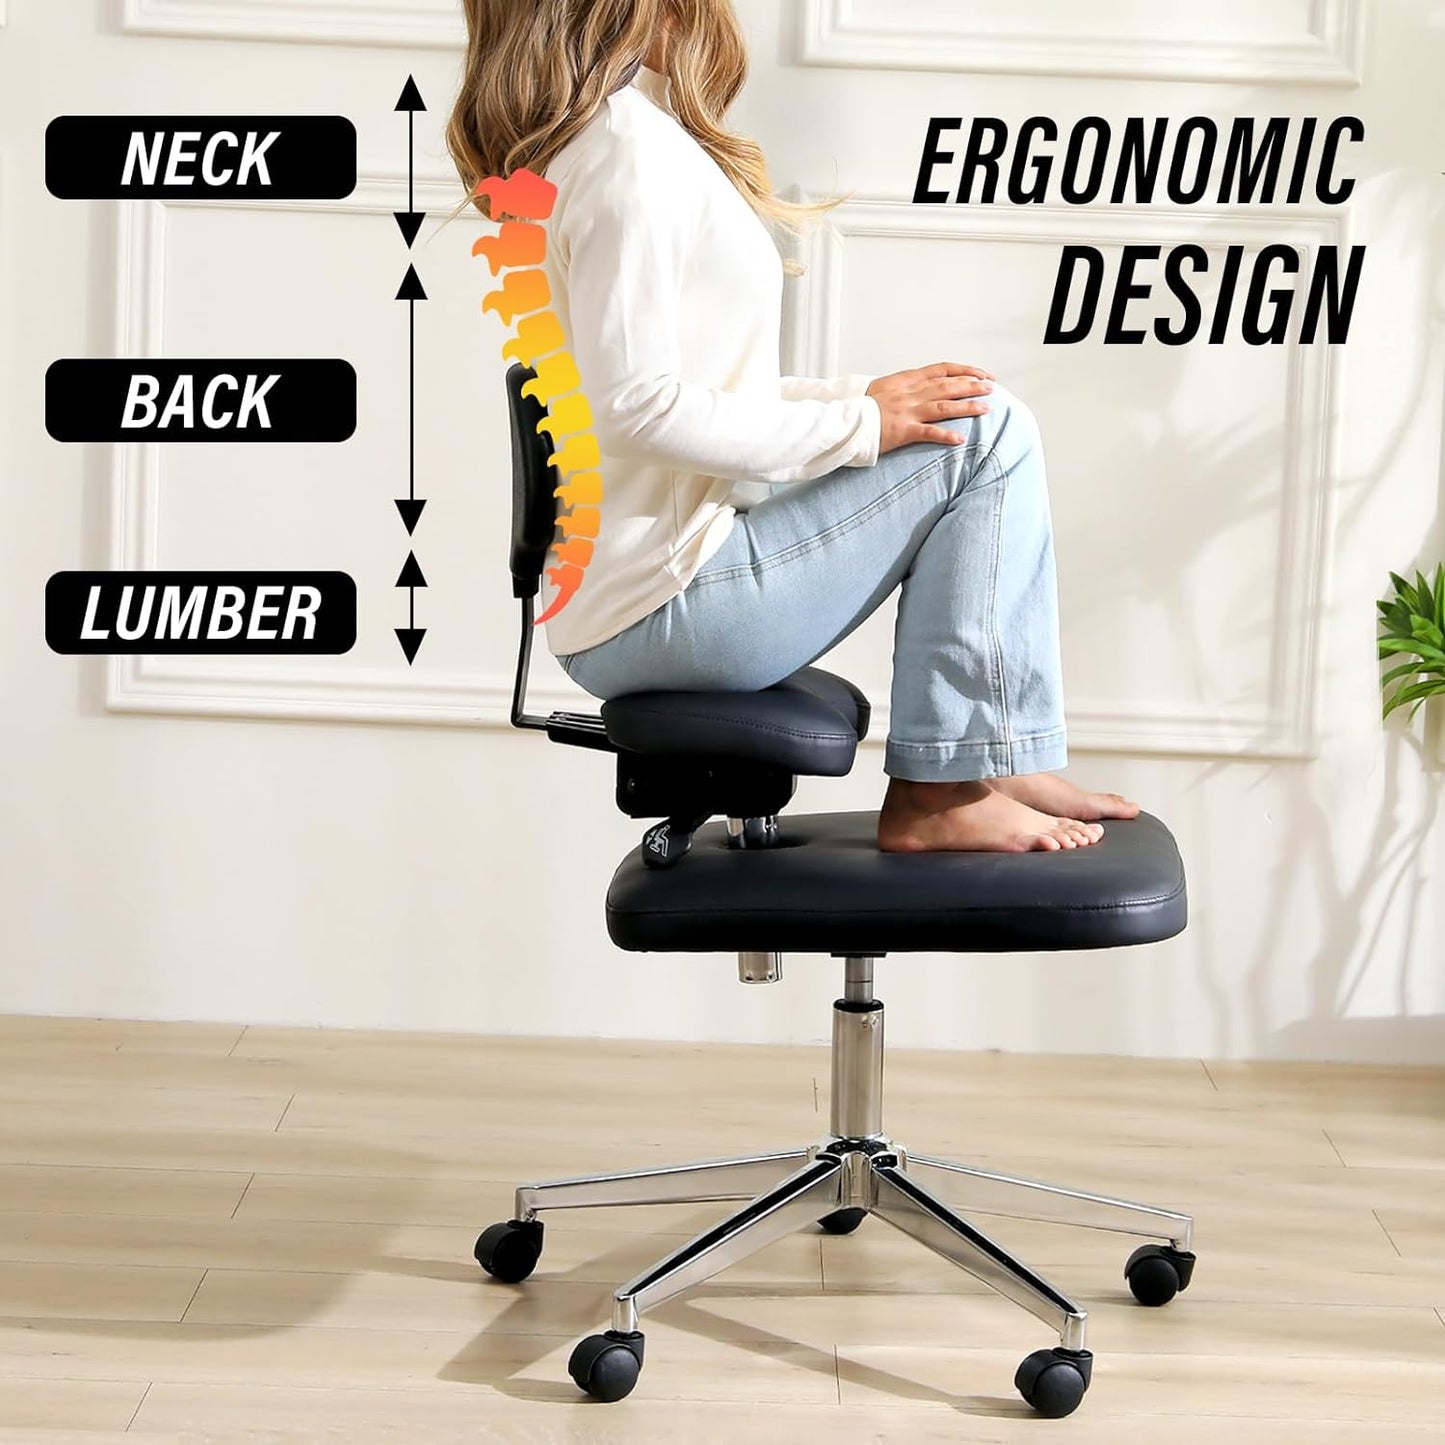 NEW - LHOOCX Cross-Legged Chair, Kneeling Chair with Lumbar Support and Adjustable Recline Angle, Ergonomic Office Chair for Office, Home and Yoga Enthusiasts, Meditation Fanatics (Black) - Retail $249